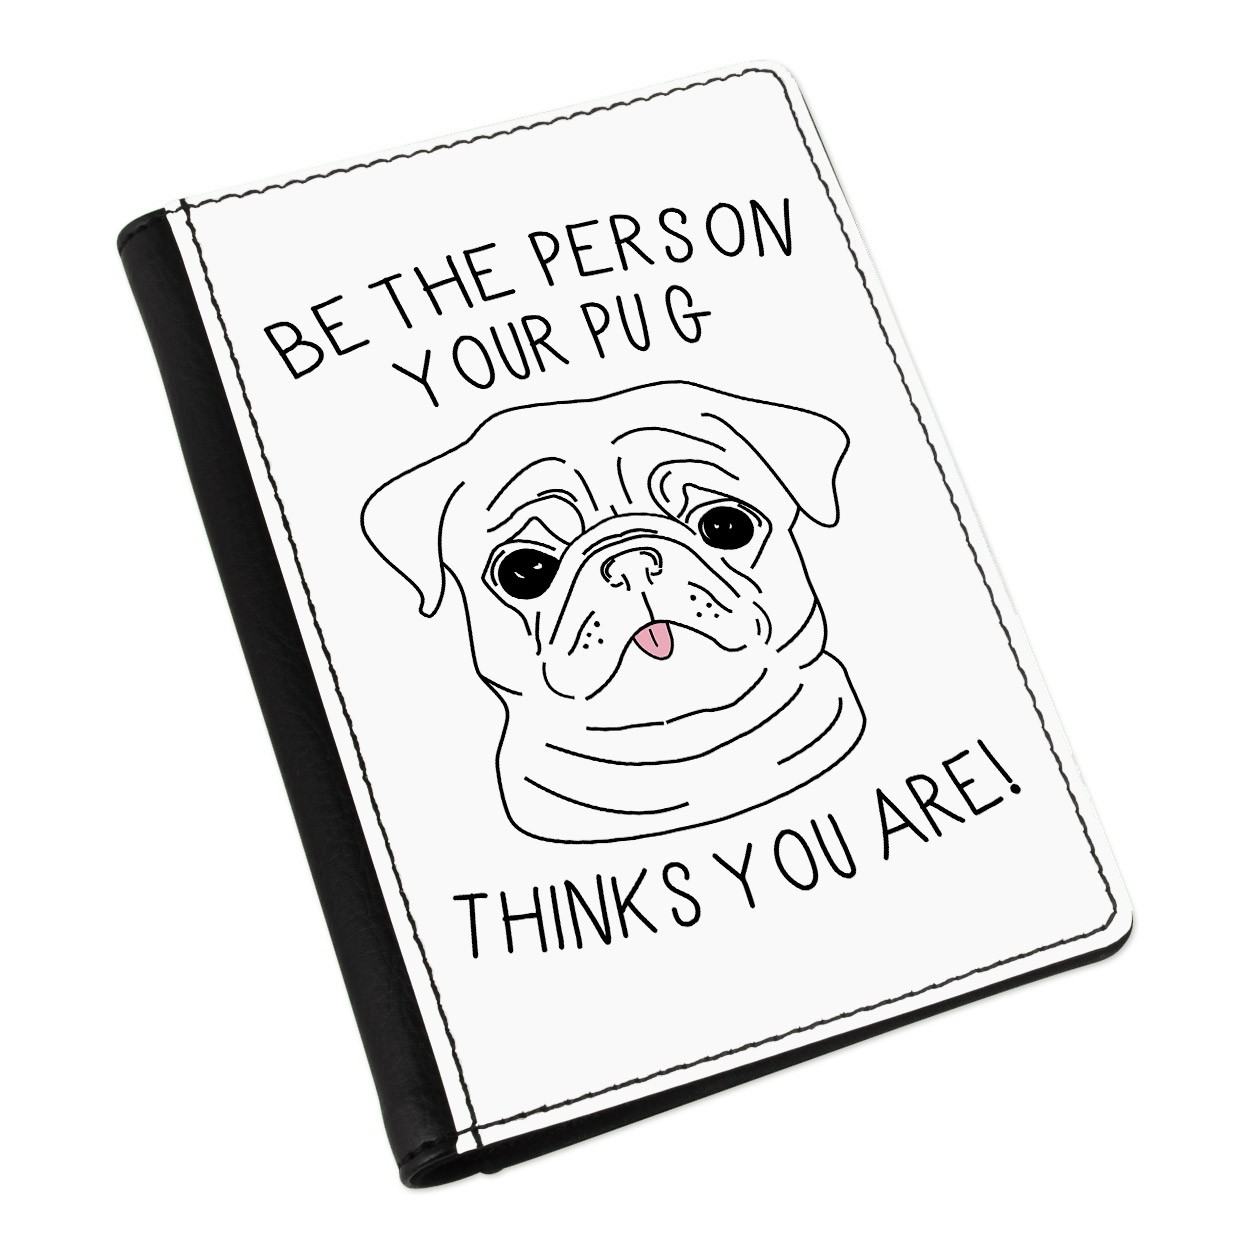 Be The Person Your Pug Thinks You Are Passport Holder Cover